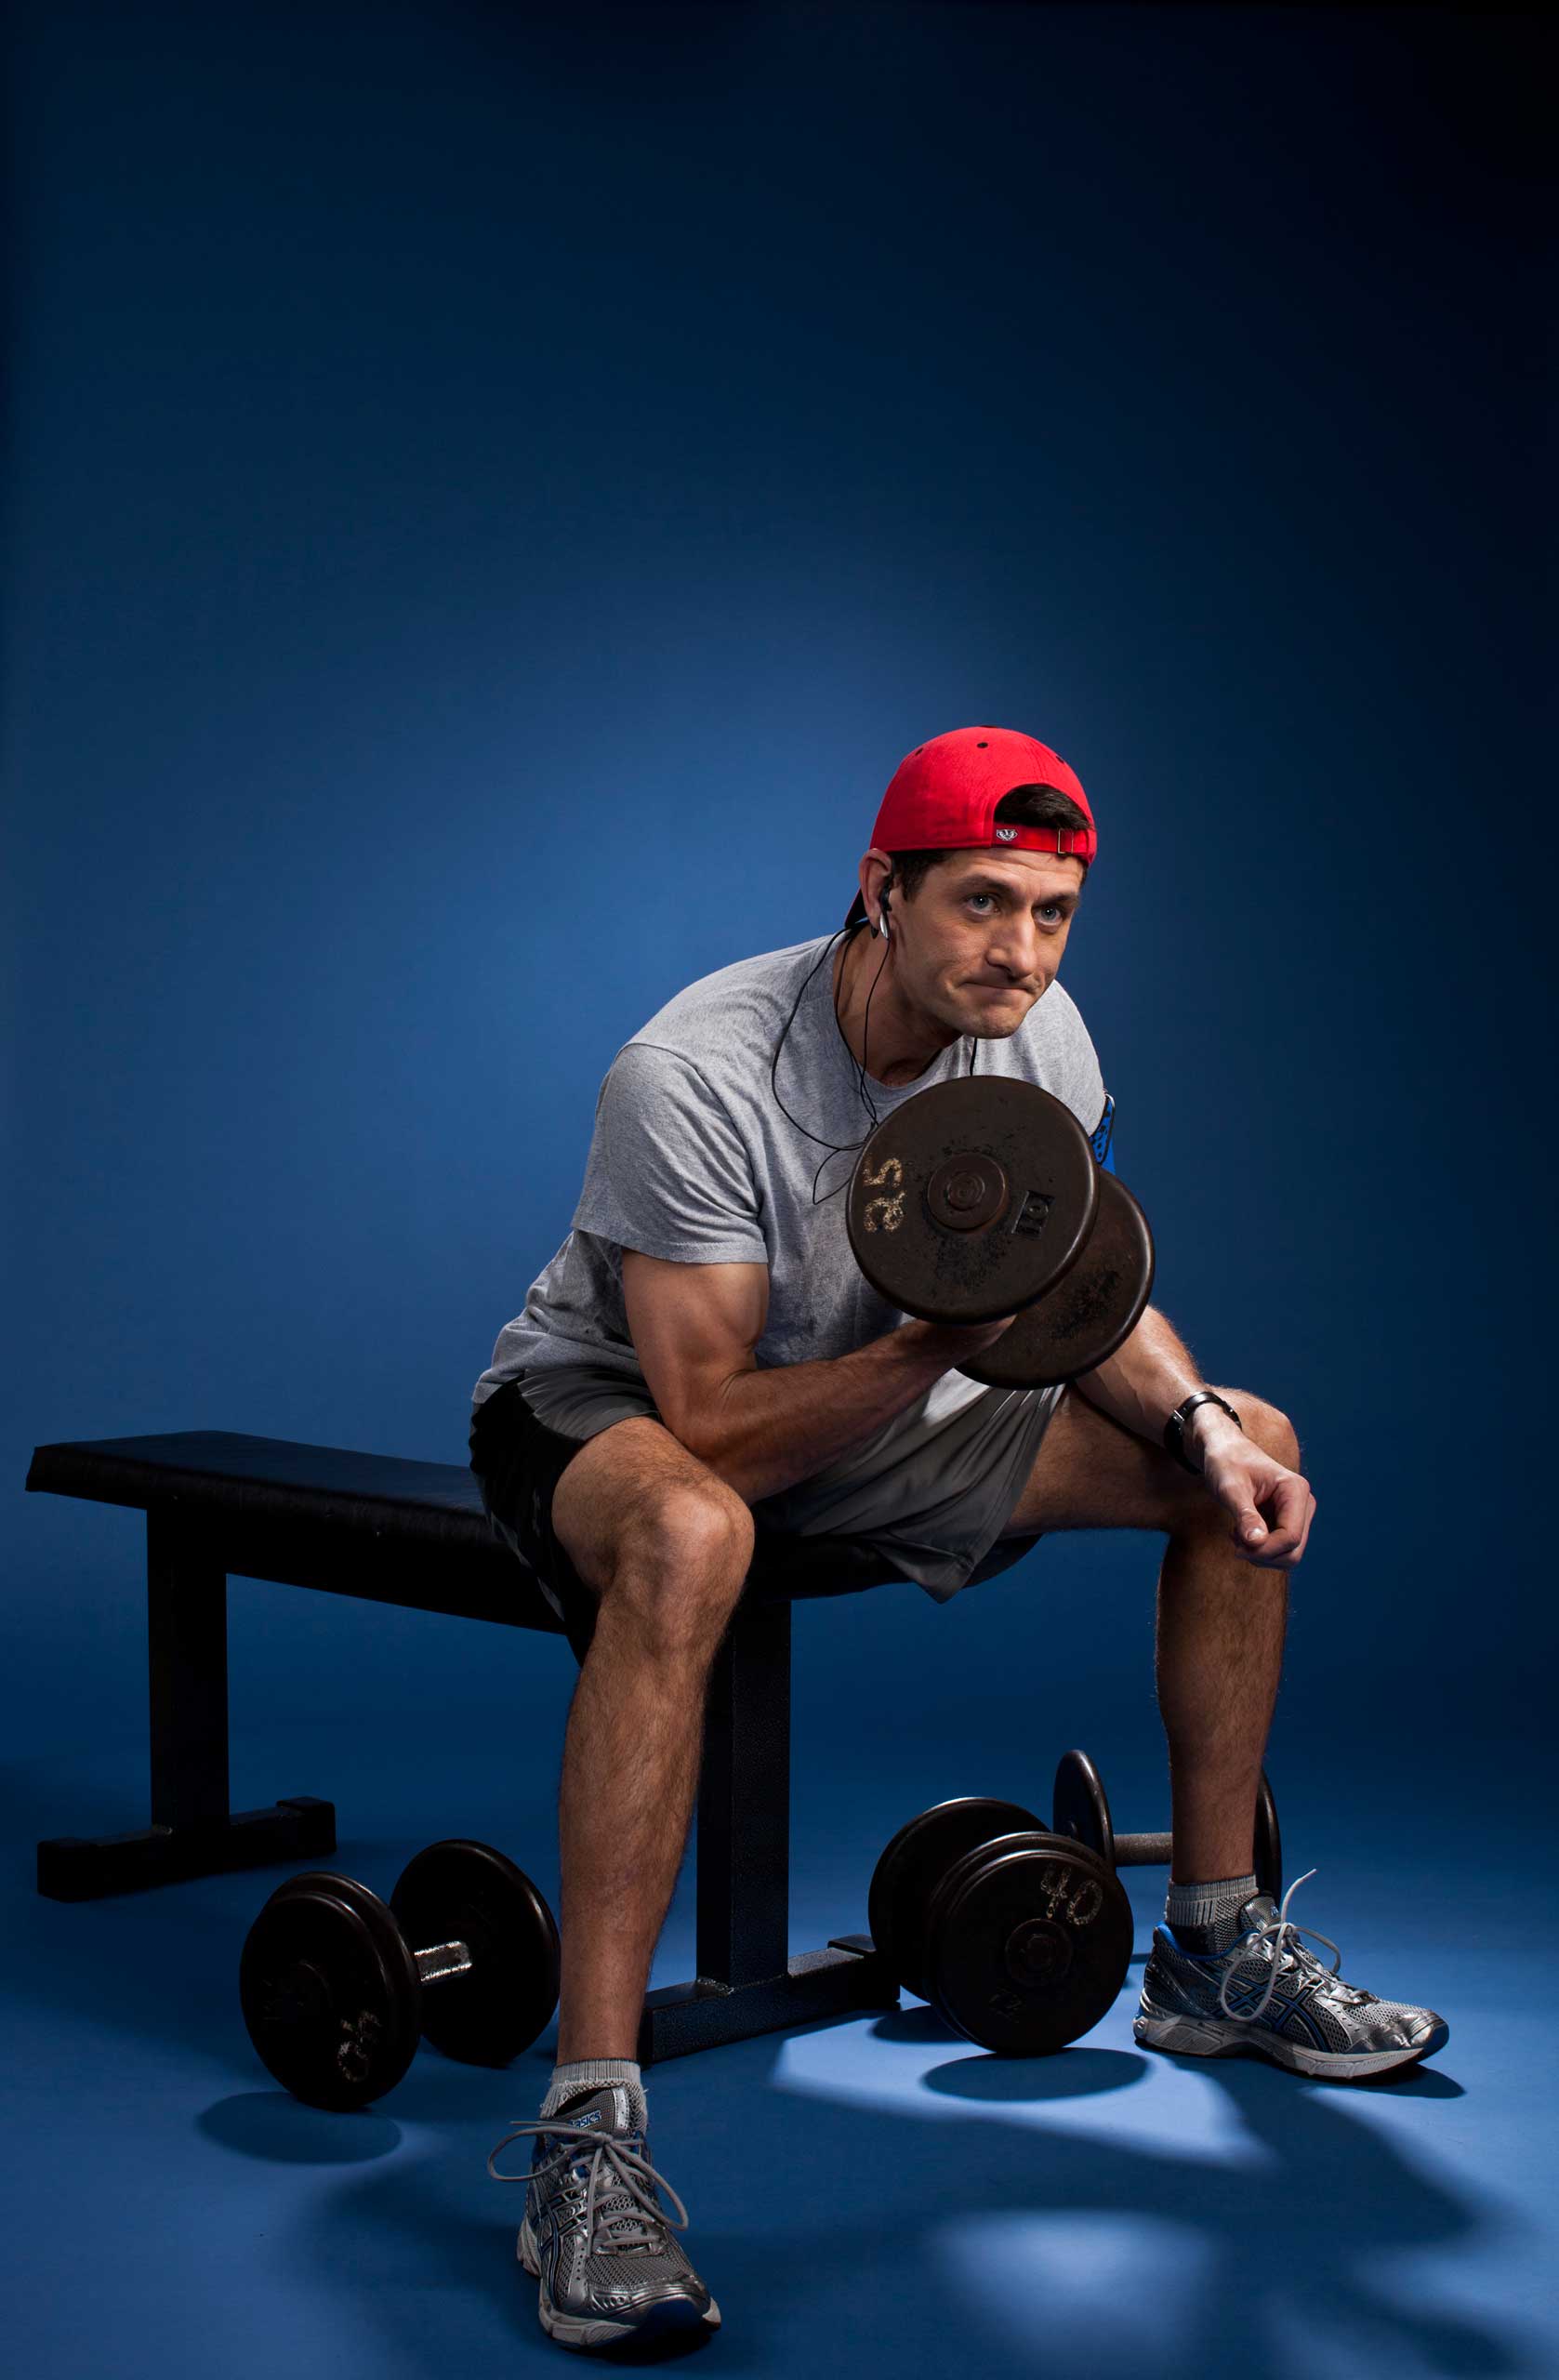 Republican vice-presidential candidate Paul Ryan was photographed demonstrating his workout technique at a gym in Janesville, Wis., for TIME in December 2011. This photo is featured in the Oct. 22, 2012, issue of TIME